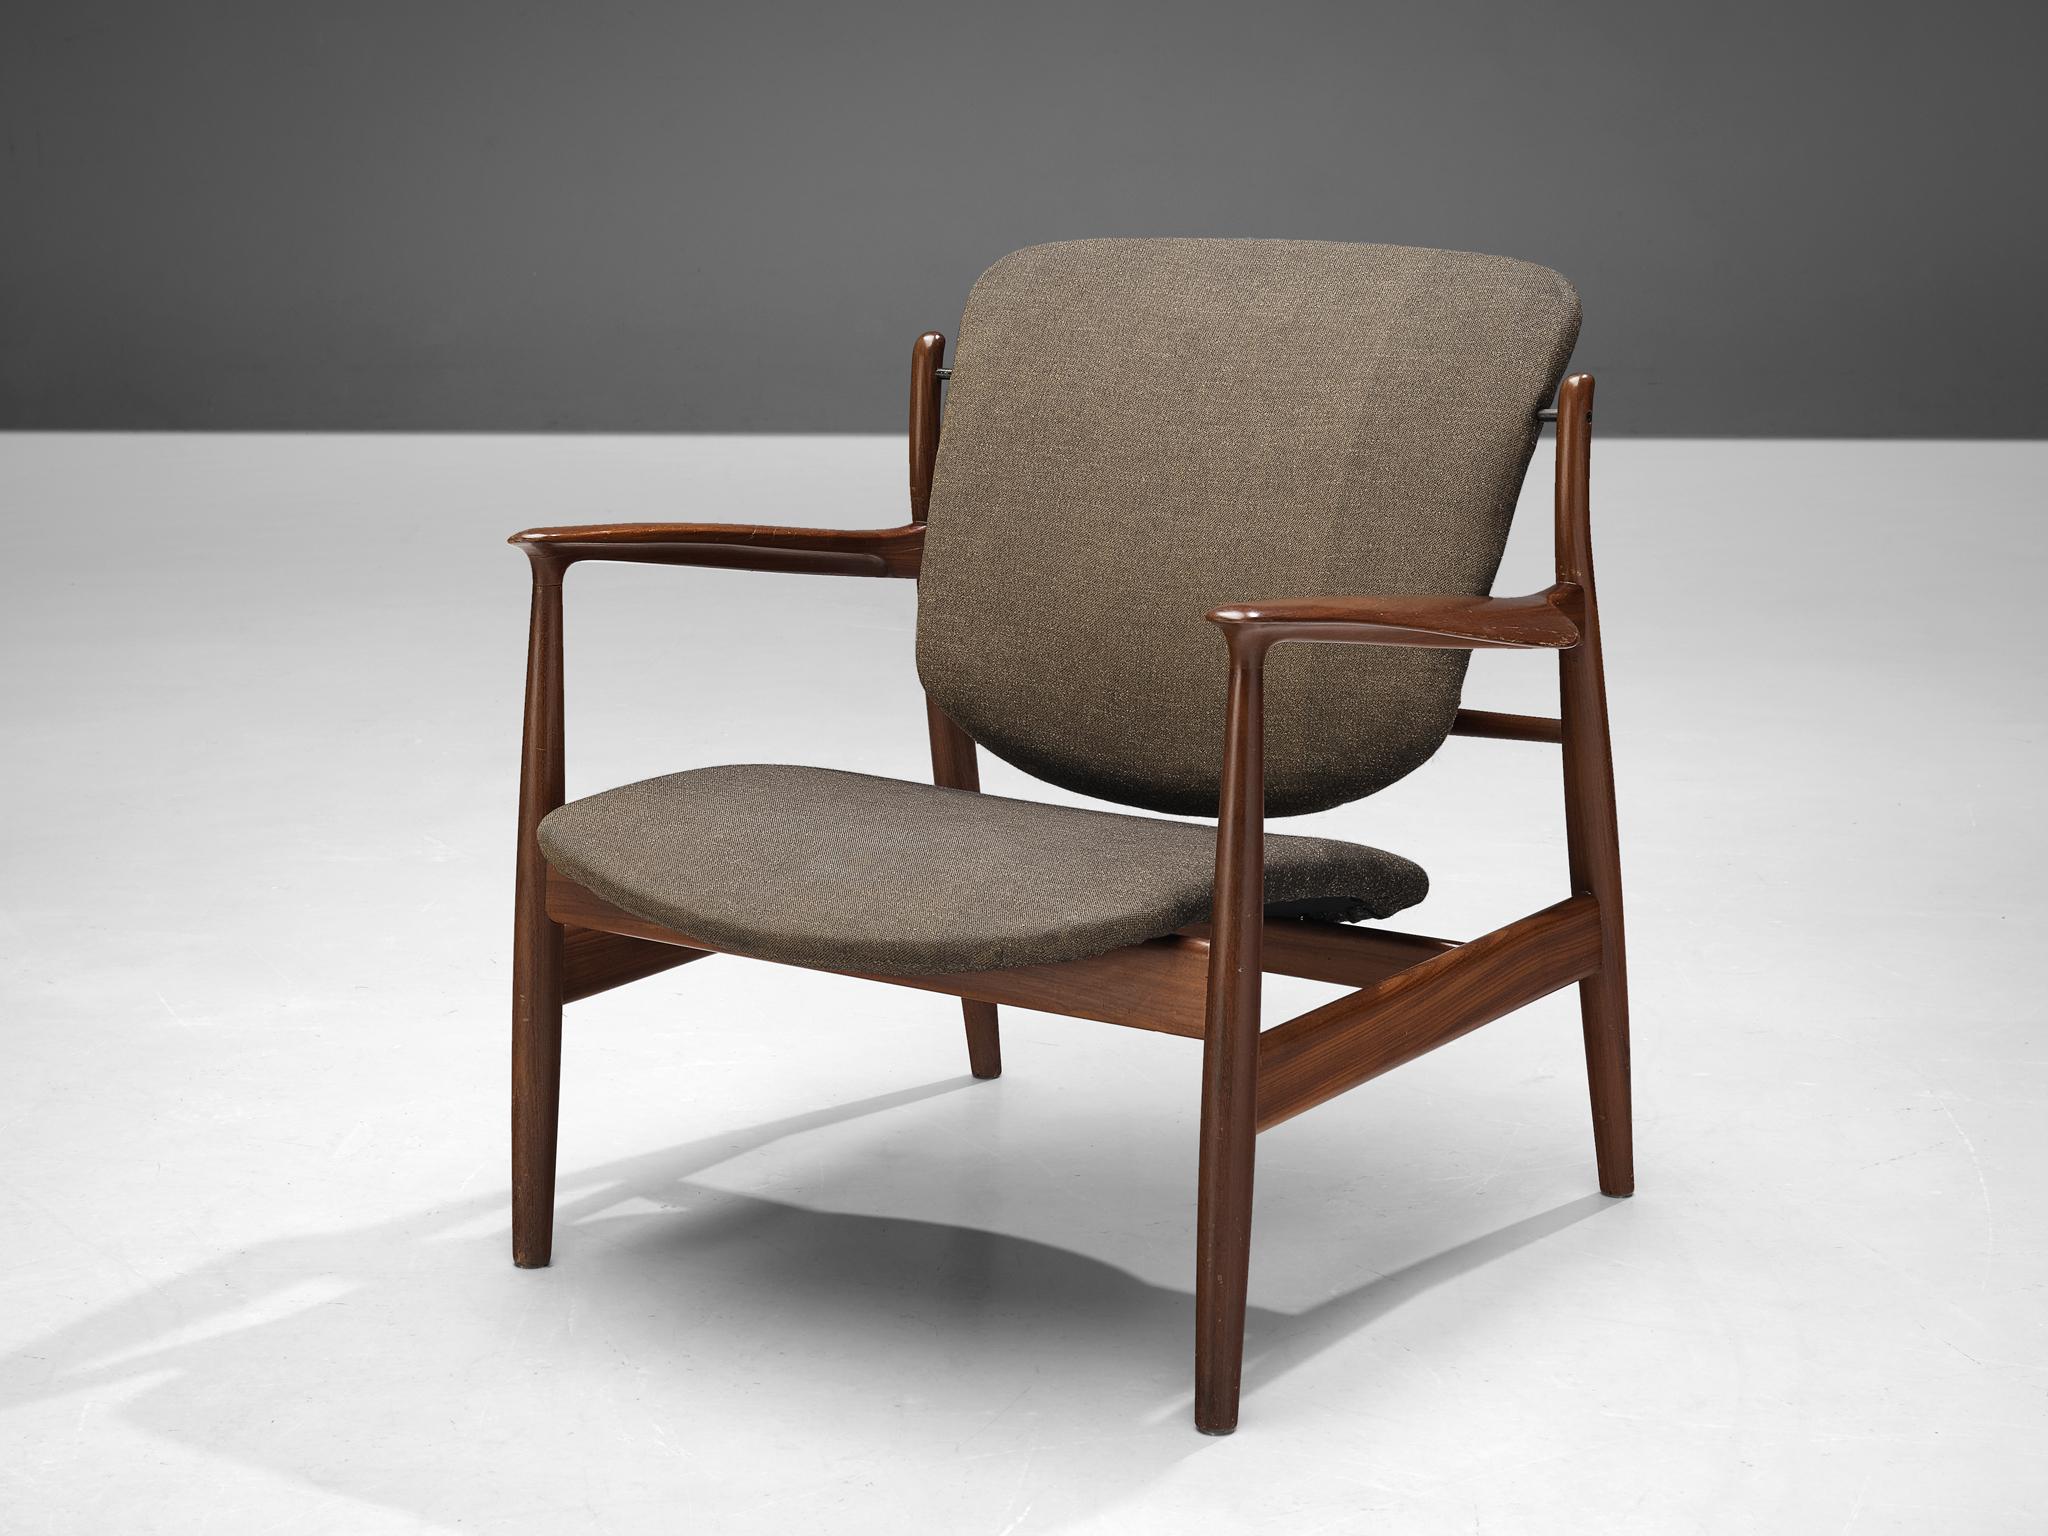 Finn Juhl for France & Søn, lounge chair early model '136', teak, fabric upholstery, Denmark, 1959. 

Very honest and open design by the Danish architect and designer Finn Juhl. As a lot of his designs, this chair as well shows its Danish origin